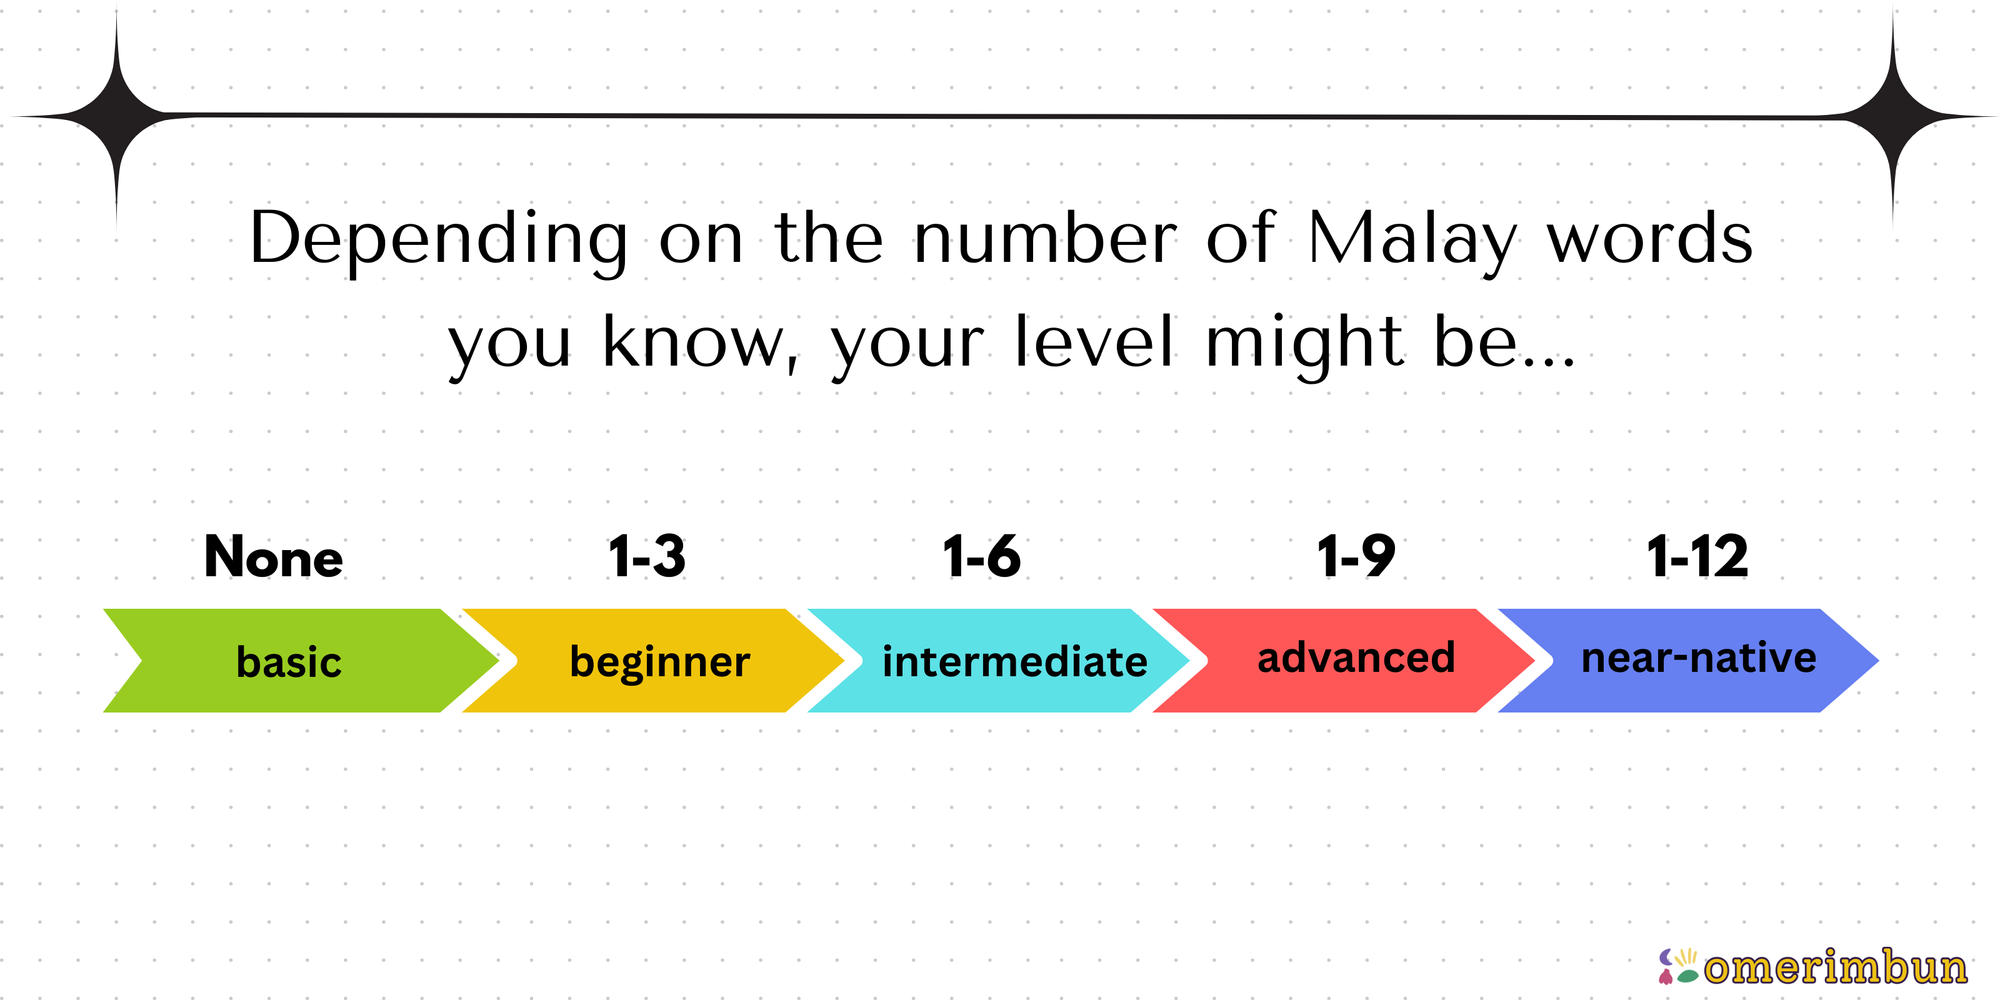 What is my Malay language level?